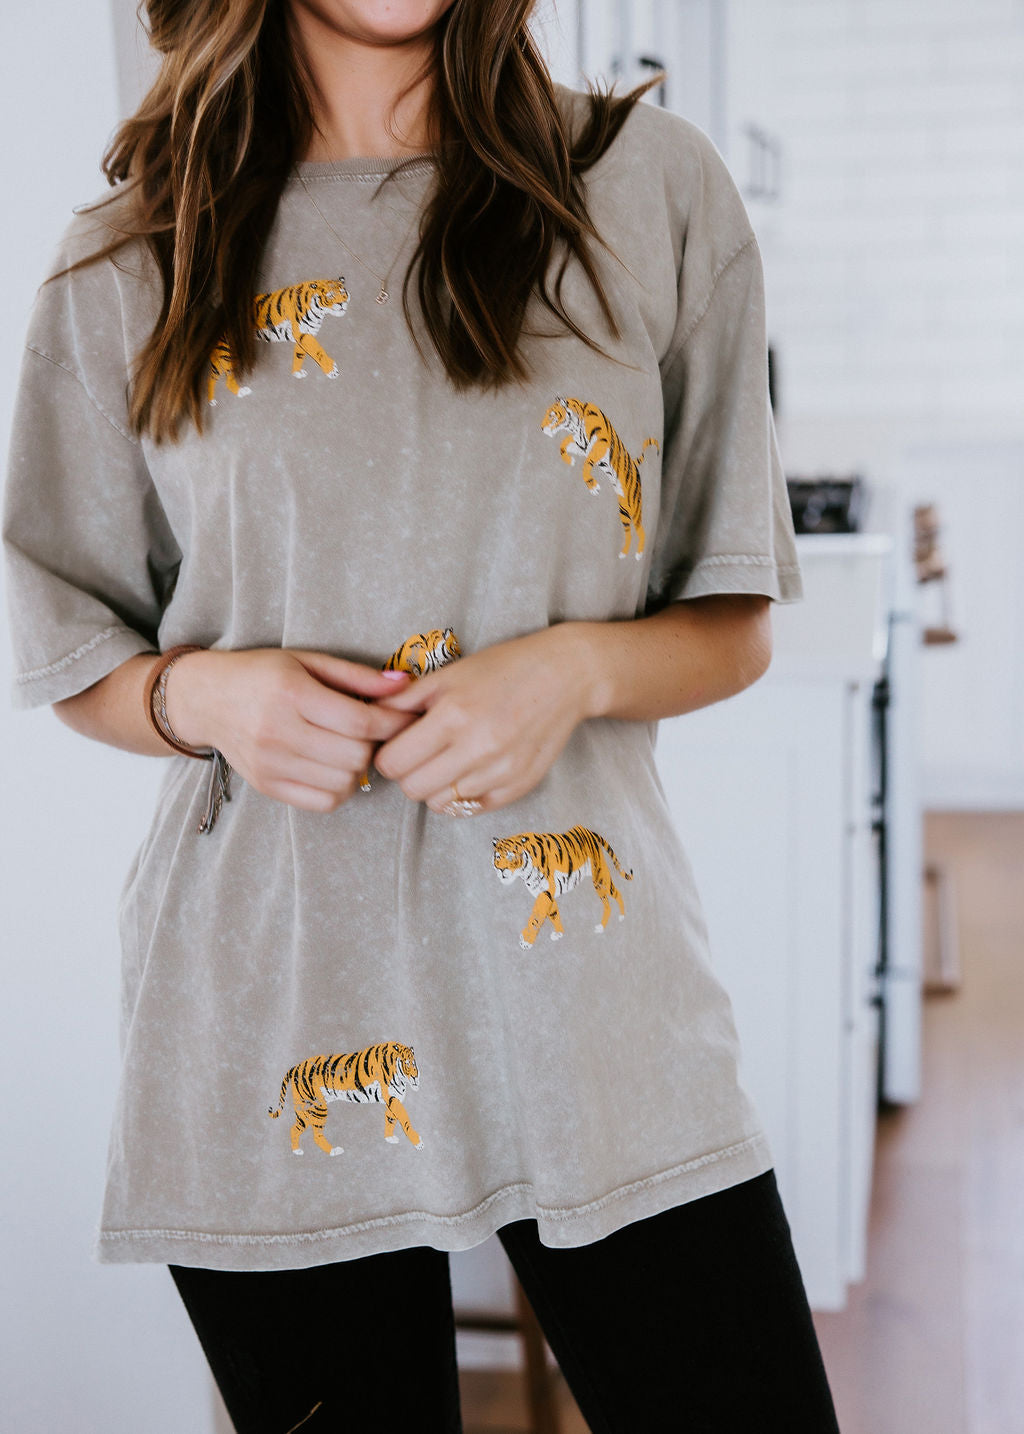 image of Prowl Tiger Graphic Tee